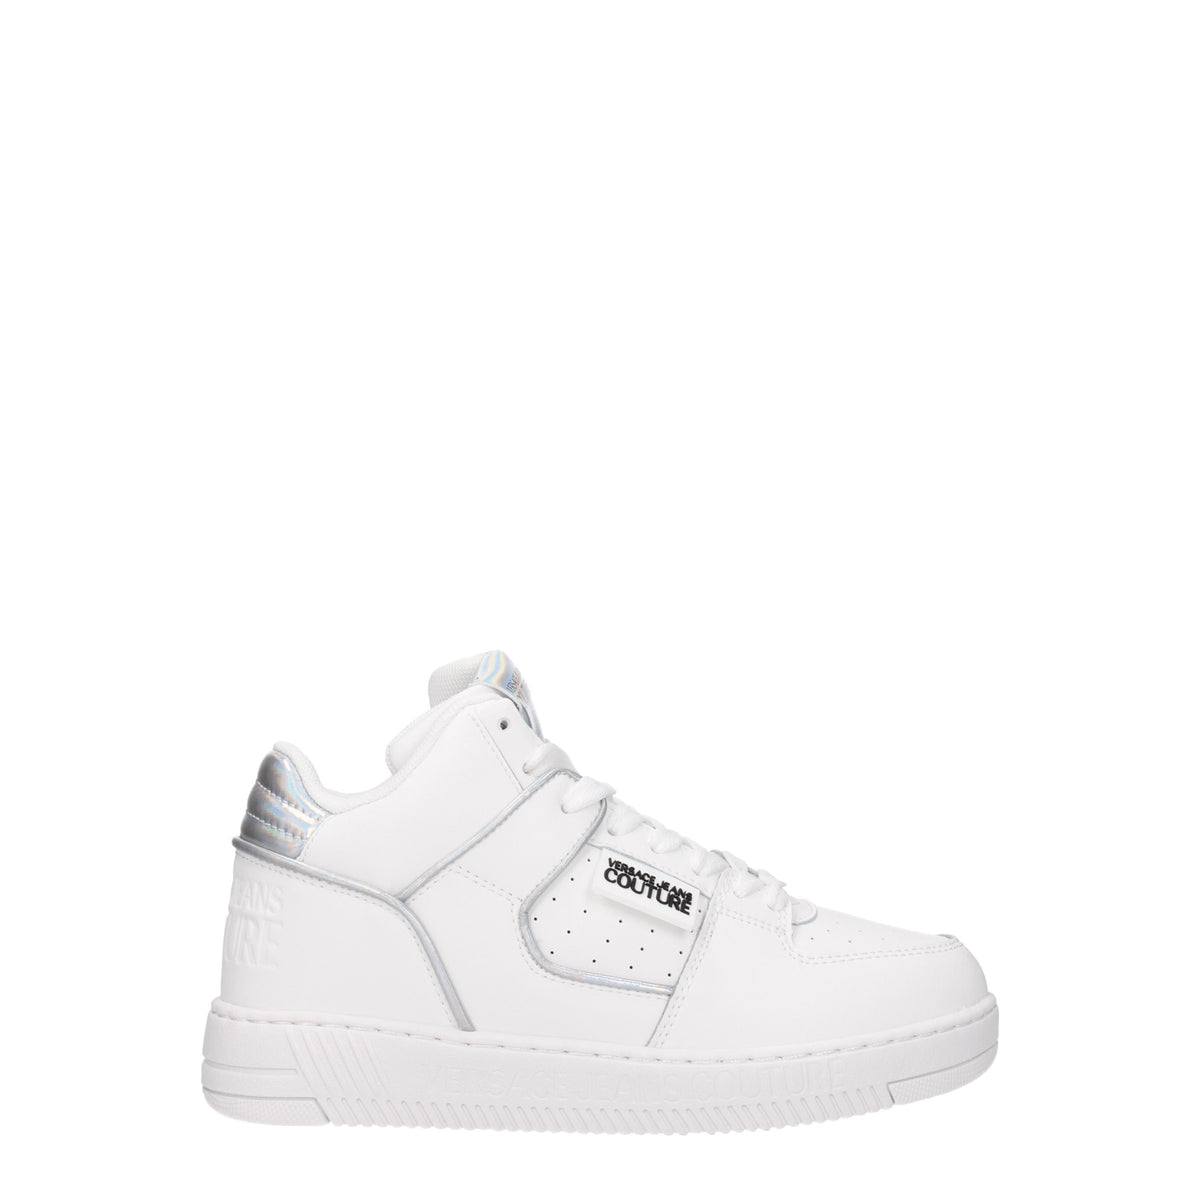 Versace Jeans Sneakers couture Donna Pelle Bianco Argento